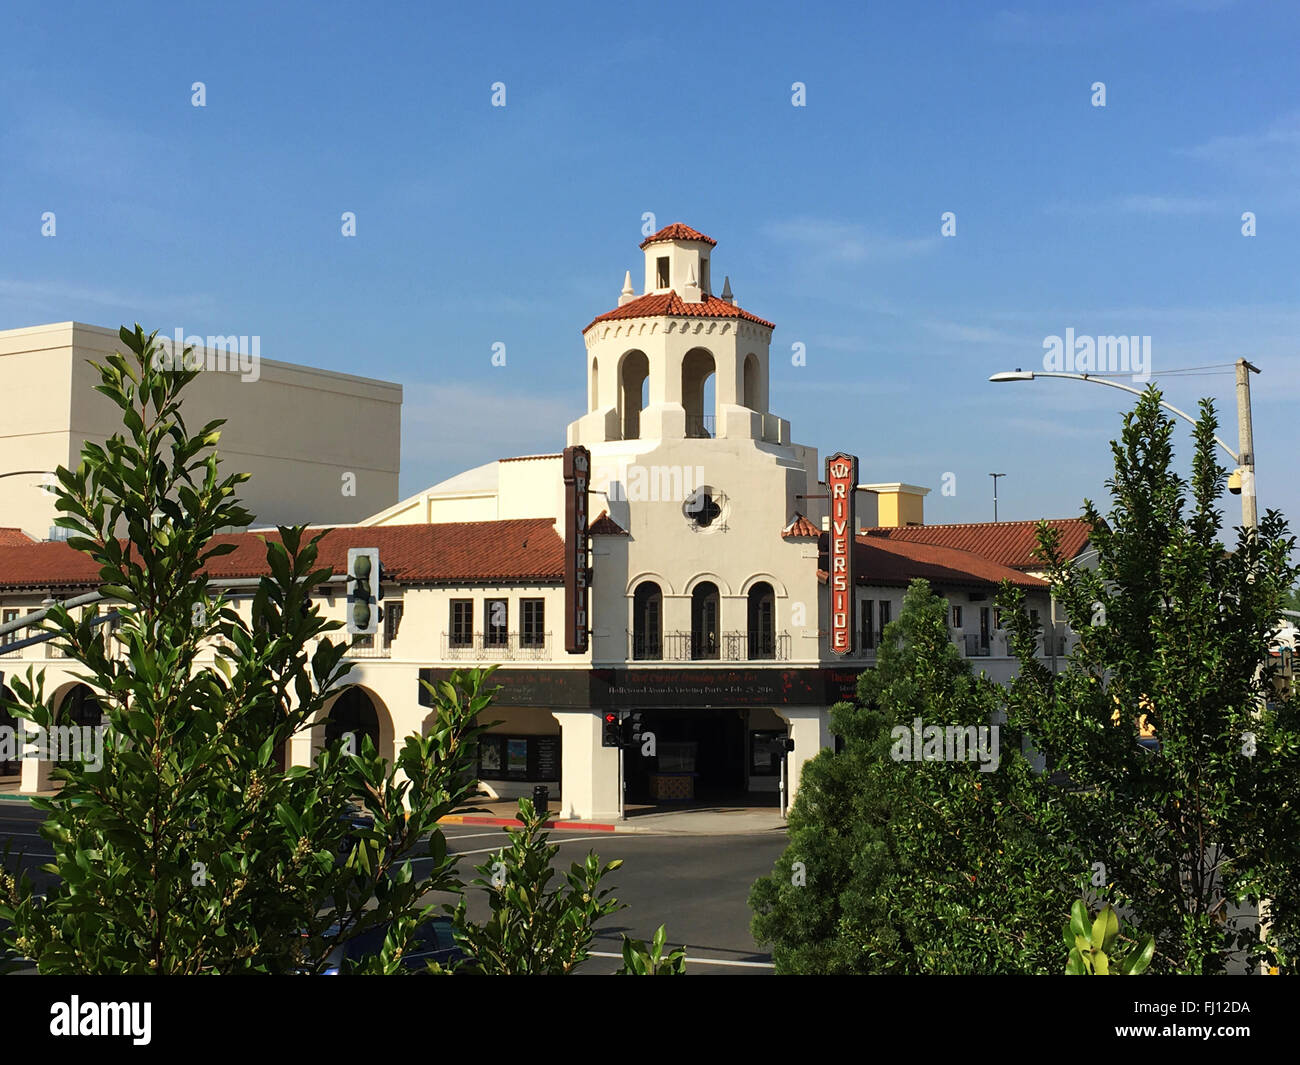 Fox Performing Arts Center in Riverside, California built in 1929 is Spanish Colonial Revival style architecture. Stock Photo